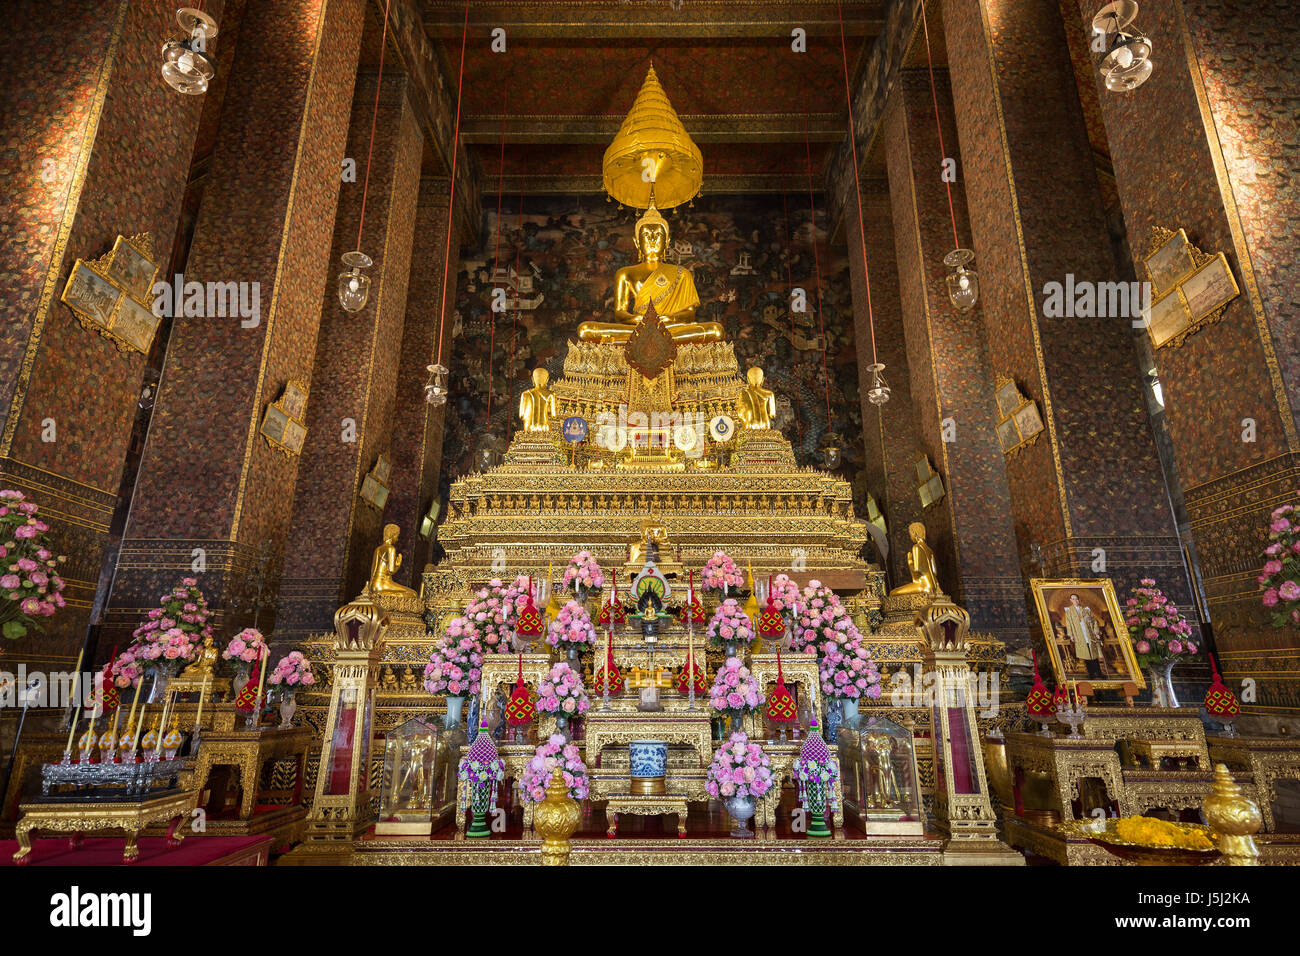 Ornate and golden altar inside the Phra Ubosot or Ordination Hall, which is the holiest prayer room at the Wat Pho (Po) temple complex in Bangkok. Stock Photo